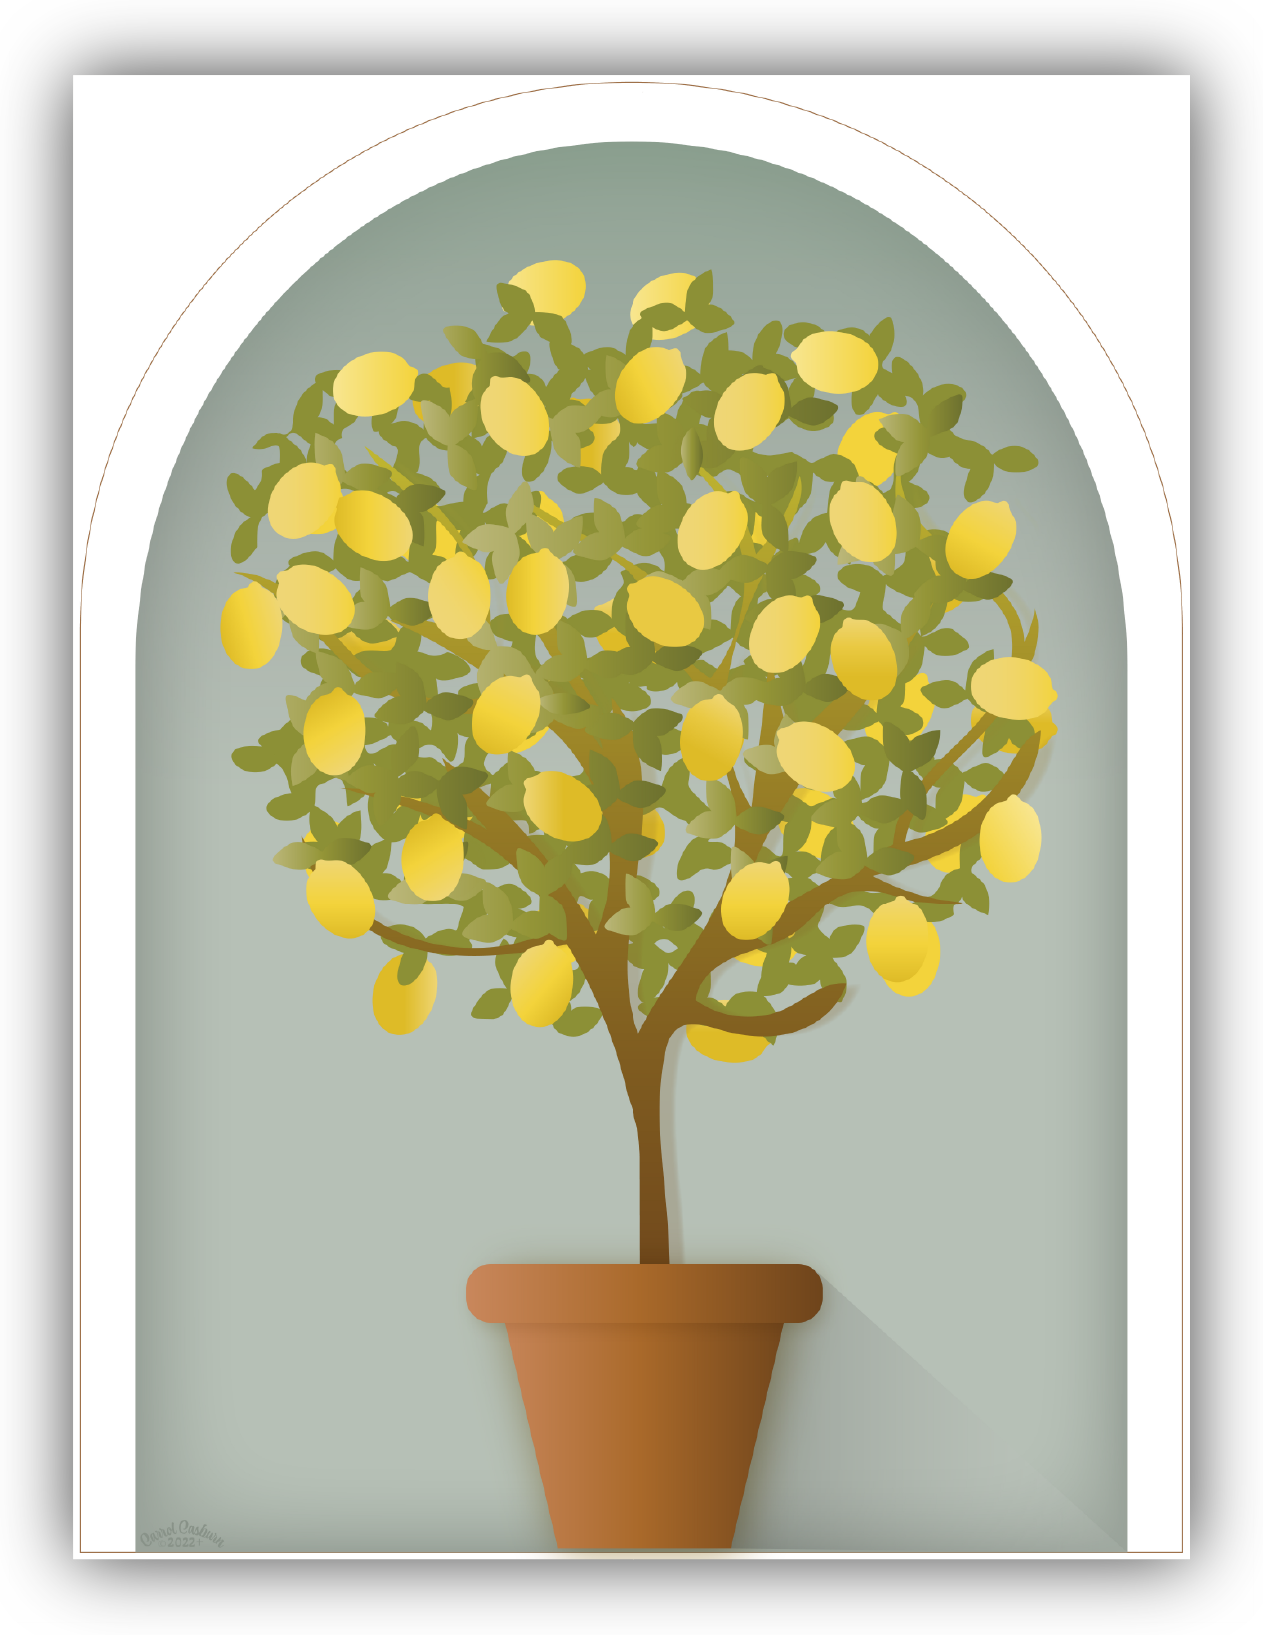 Elegant Lemon Tree Topiary Wall Art Blue with White | FINE ART PRINT - Green Pear House and Home